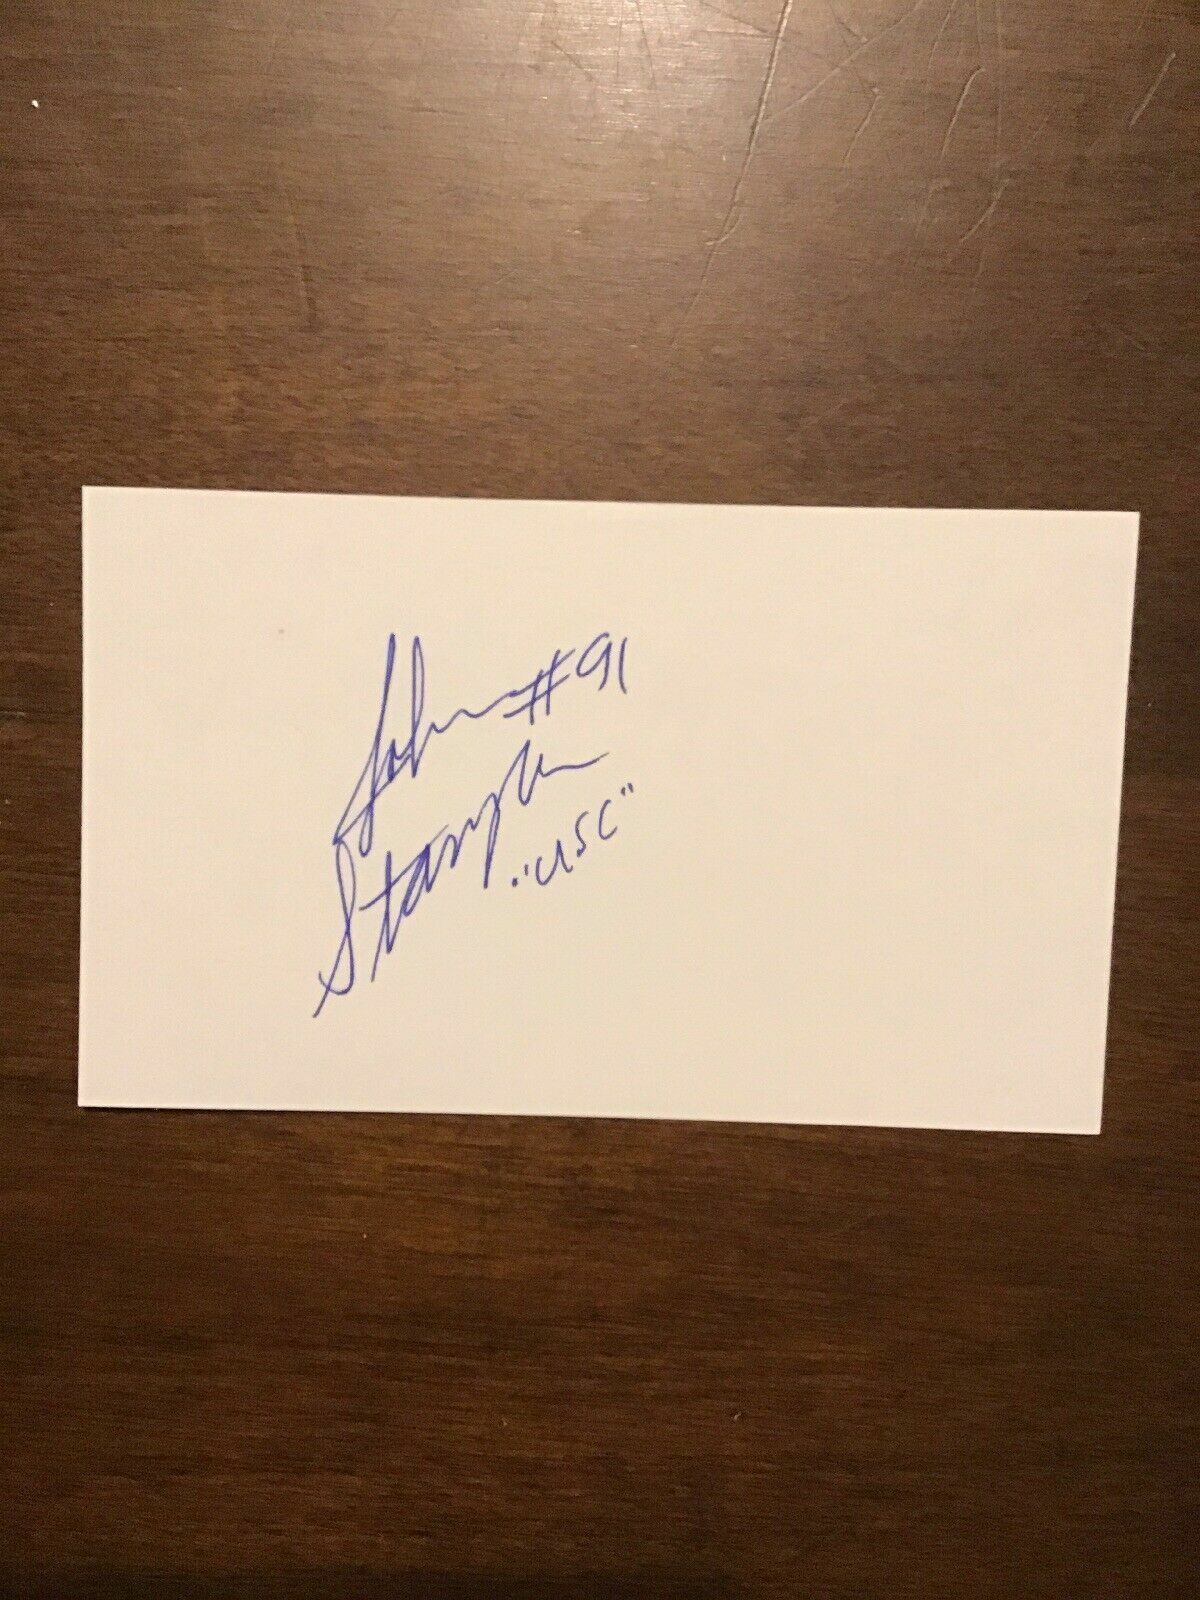 JOHN STAMPER - USC FOOTBALL - AUTHENTIC AUTOGRAPH SIGNED - A9630